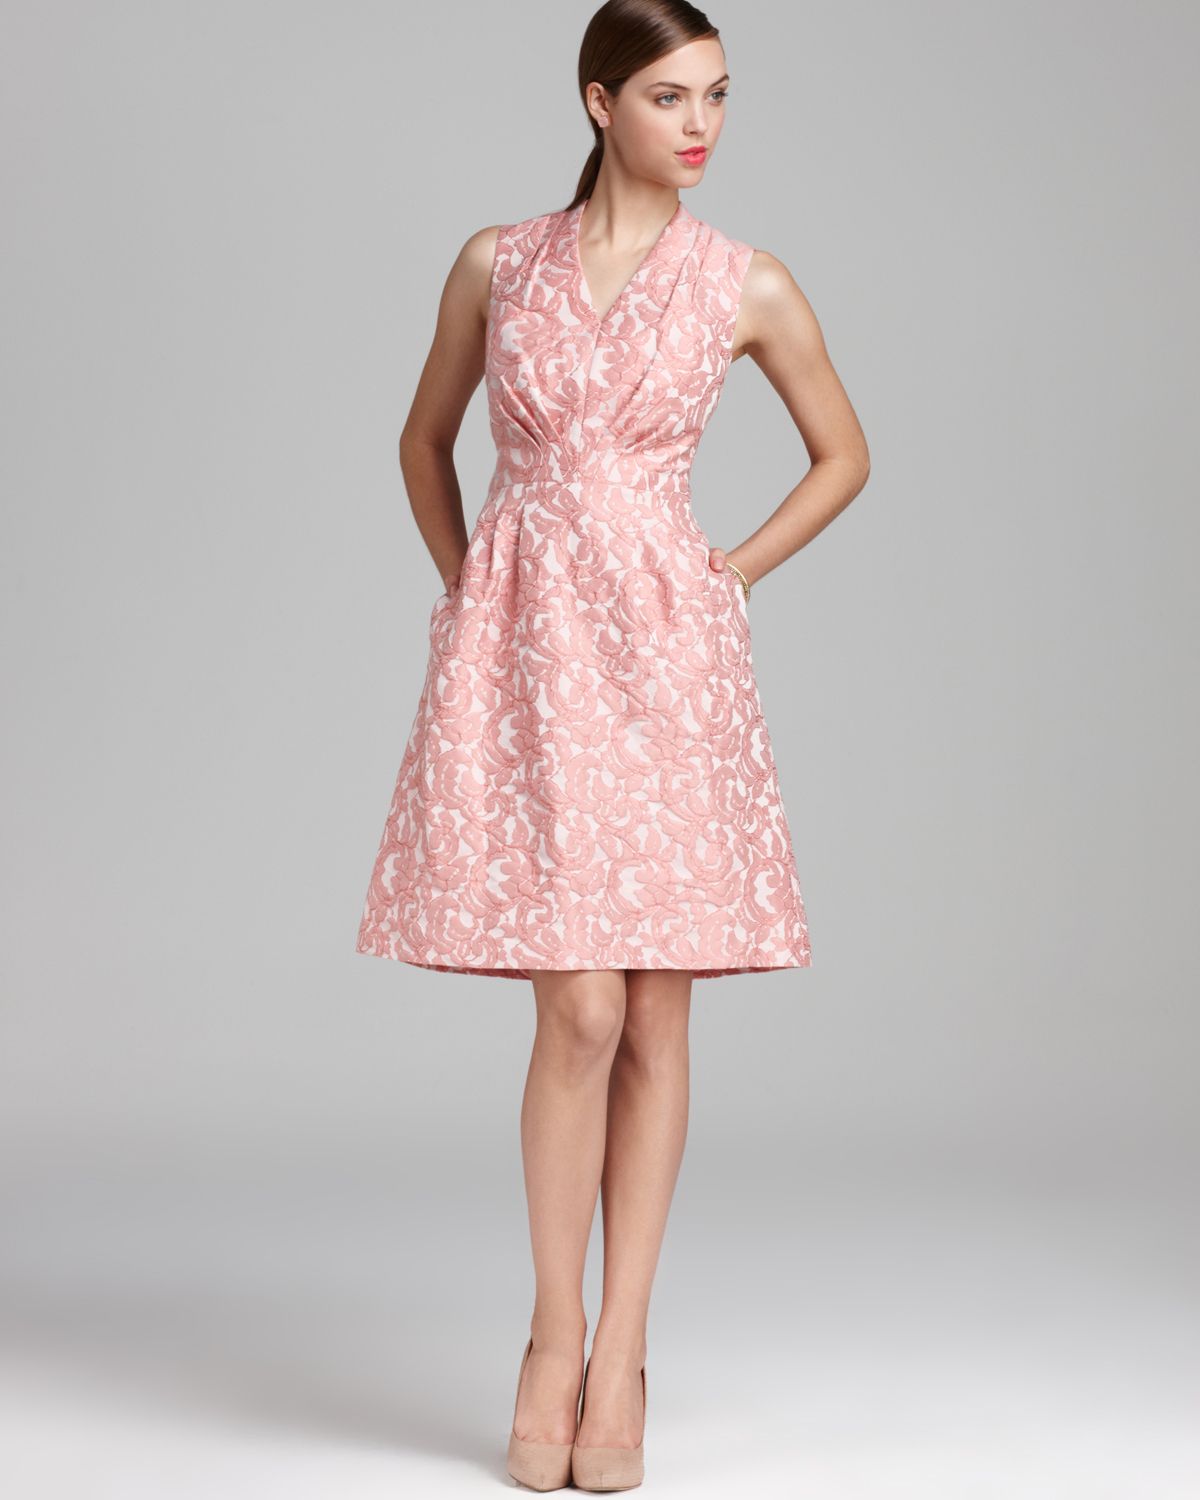 Adrianna Papell Jacquard Dress Sleeveless Fit and Flare in Pink | Lyst